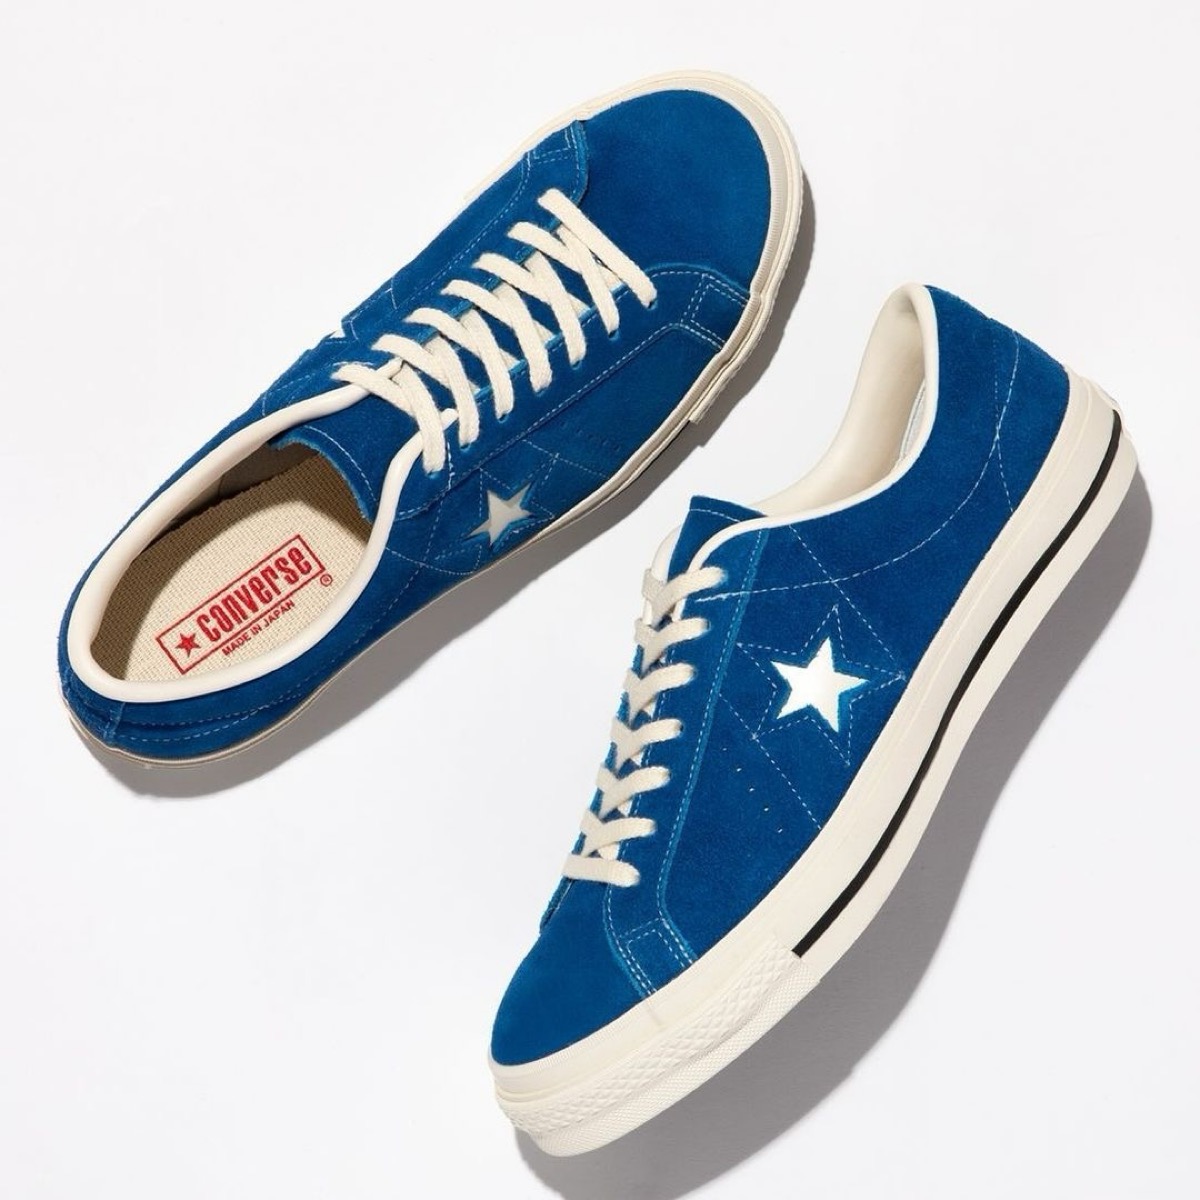 CONVERSE『ONE STAR J SUEDE “VINTAGE BLUE”』が国内5月17日に発売 ［35200670］ | UP TO DATE